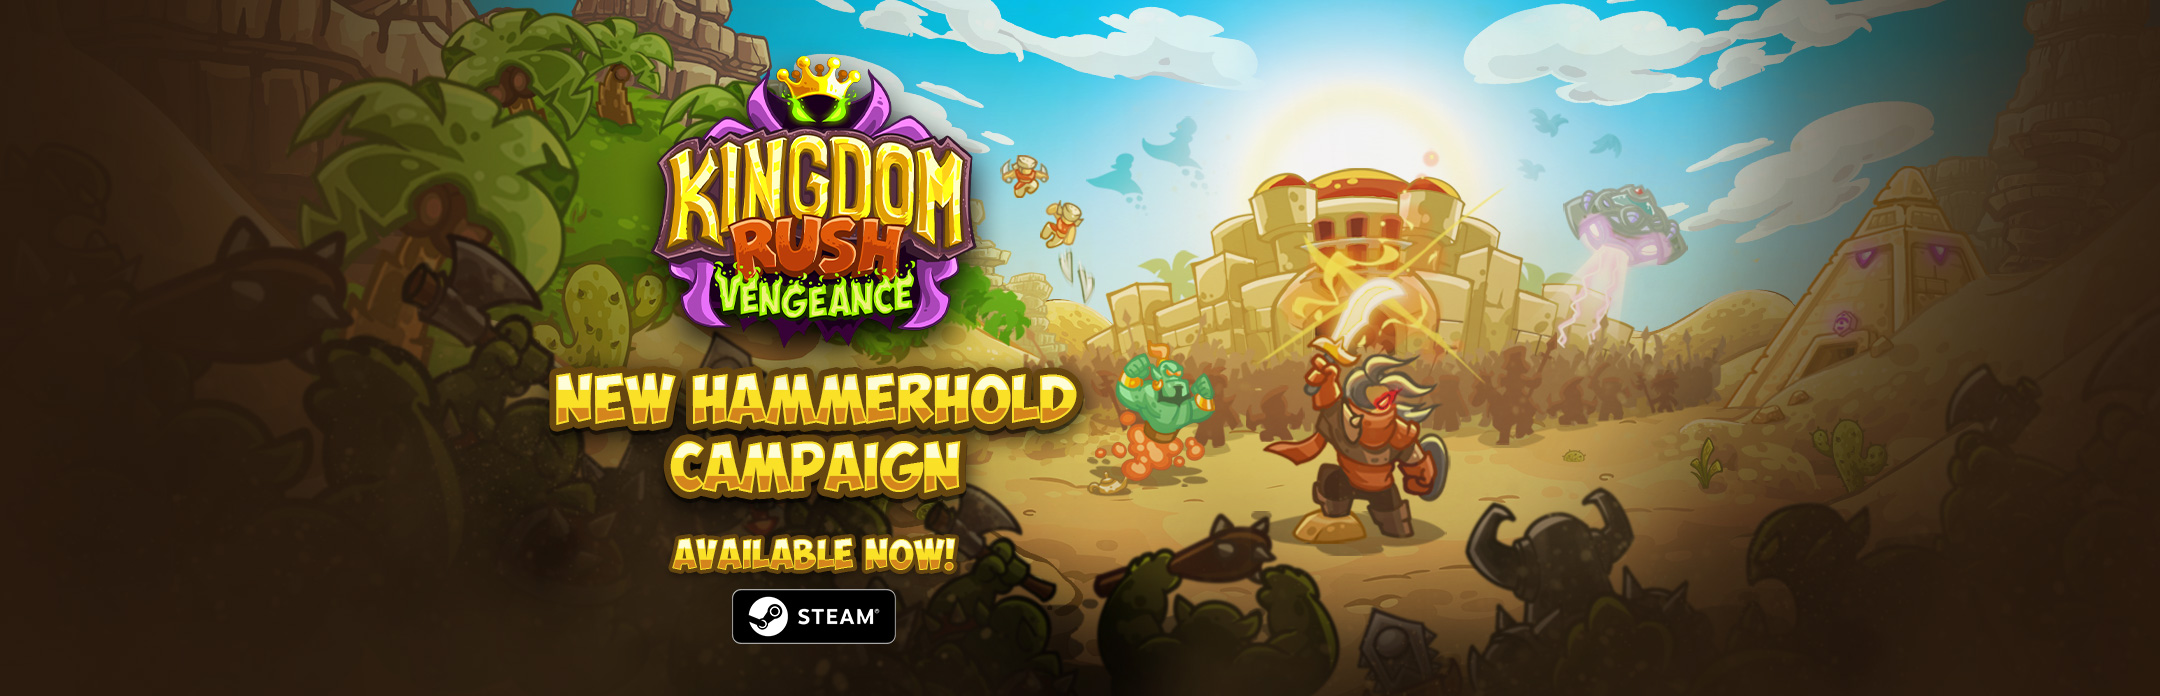 Hammerhold Campaign Available Now on Steam